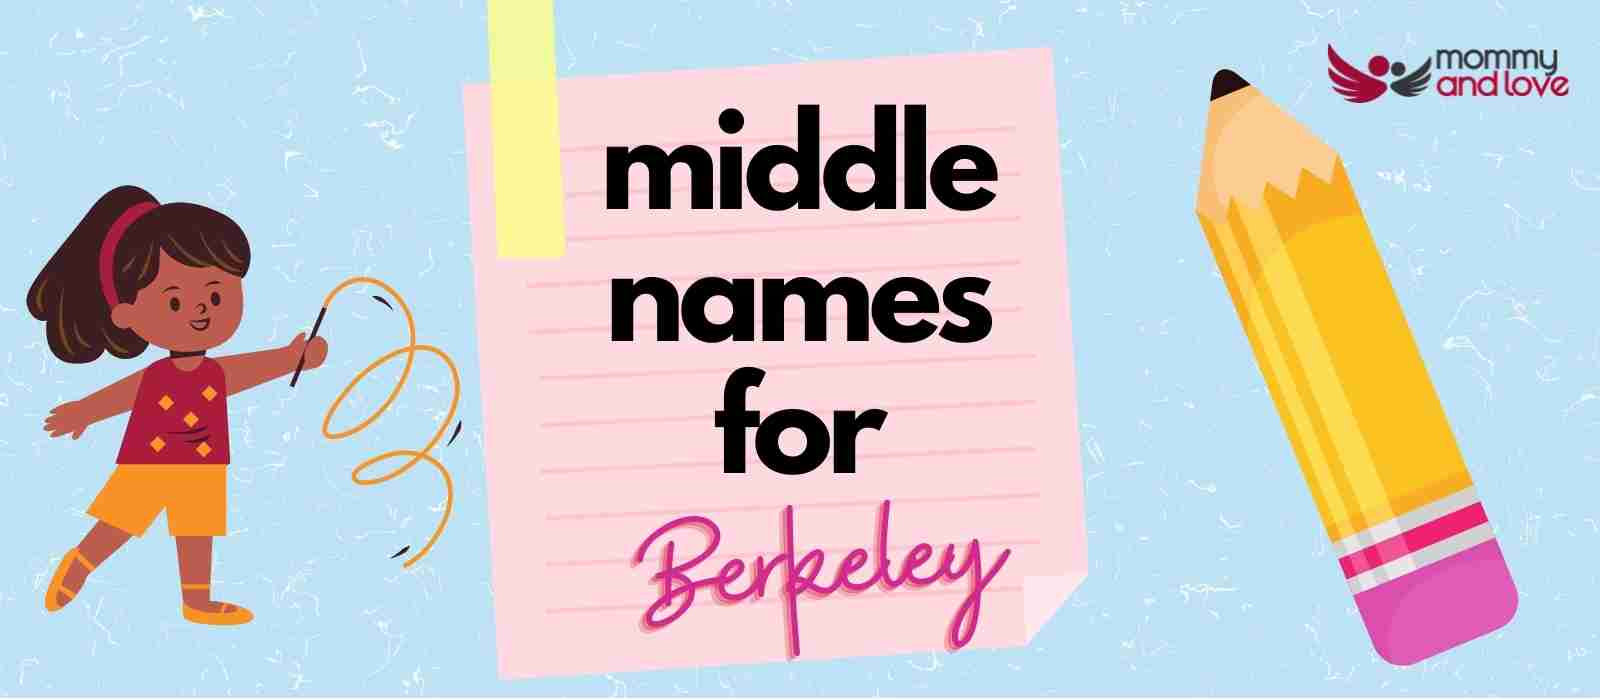 Middle Names for Berkeley